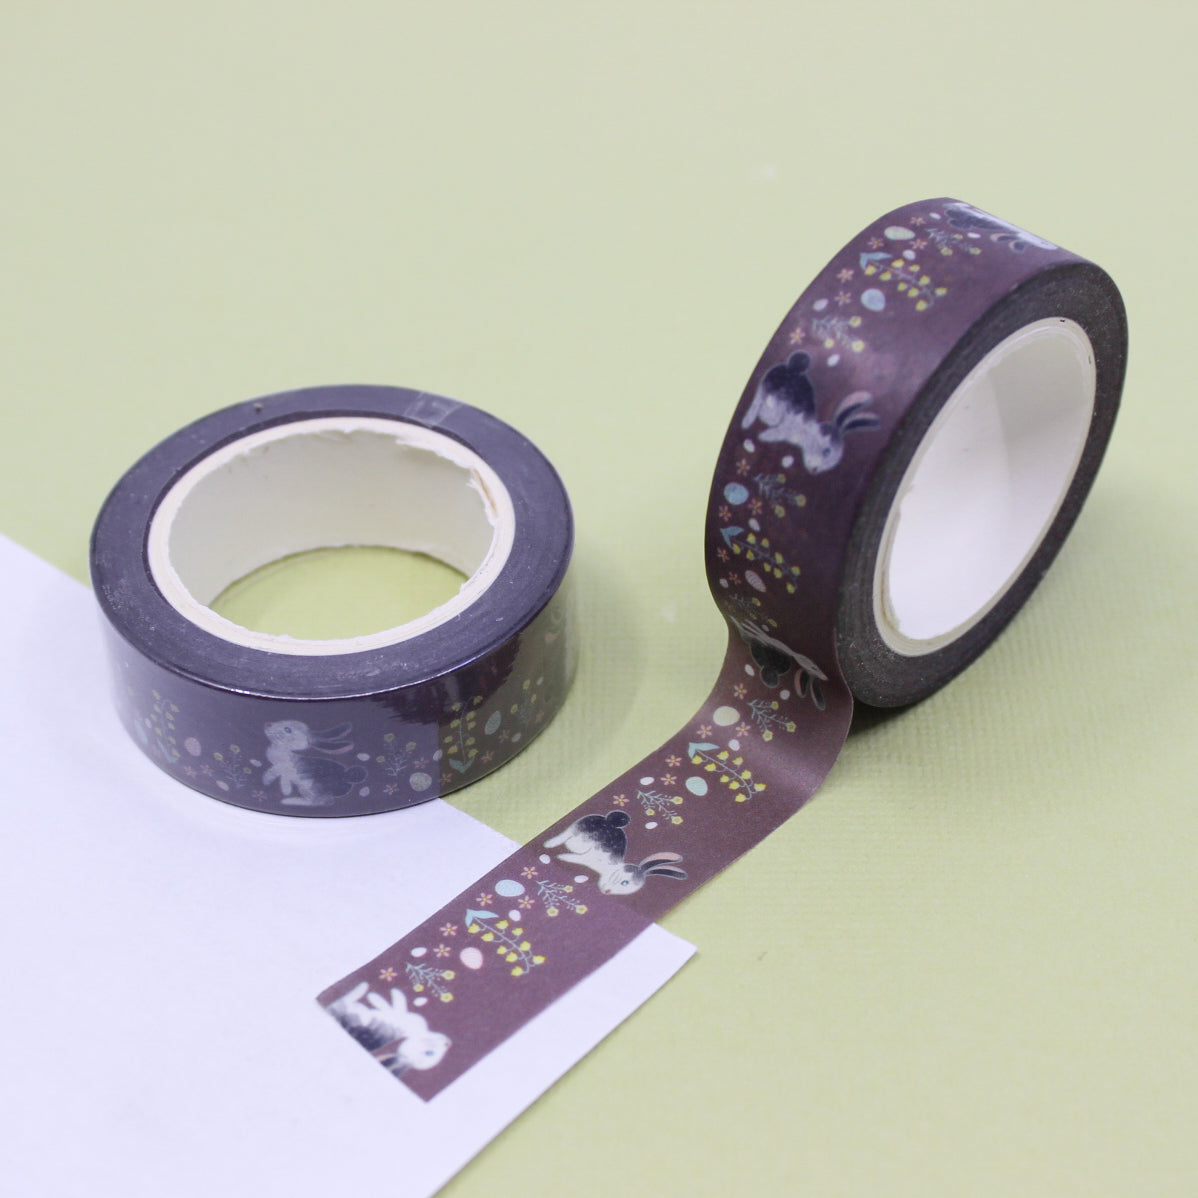 Brown Bunnies with Easter Eggs Washi Tape: Add a touch of whimsy to your Easter crafts with this delightful washi tape featuring cute brown bunnies surrounded by colorful Easter eggs, perfect for decorating cards, scrapbooks, and more. This tape is sold at BBB Supplies Craft Shop.